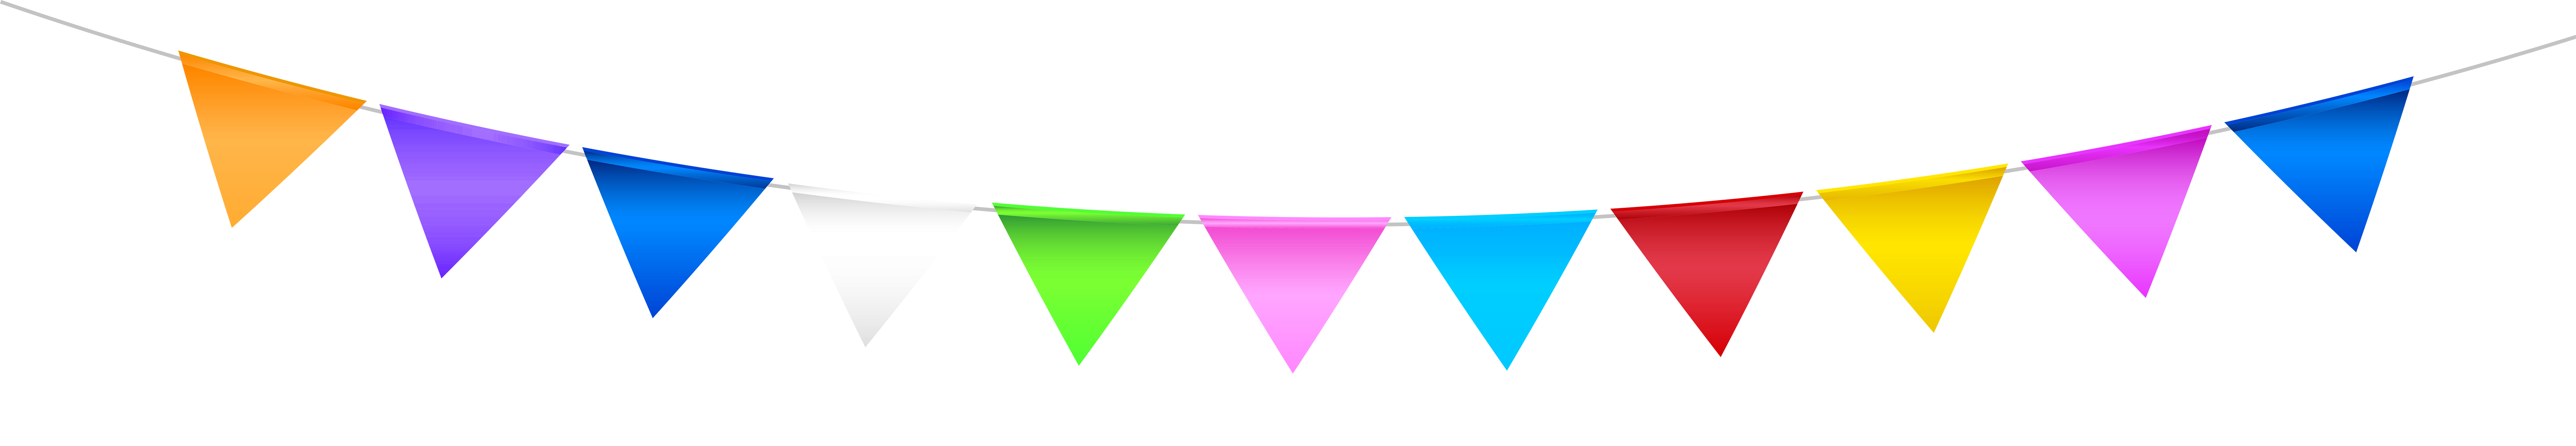 Streamers clipart corner. Transparent colorful streamer png